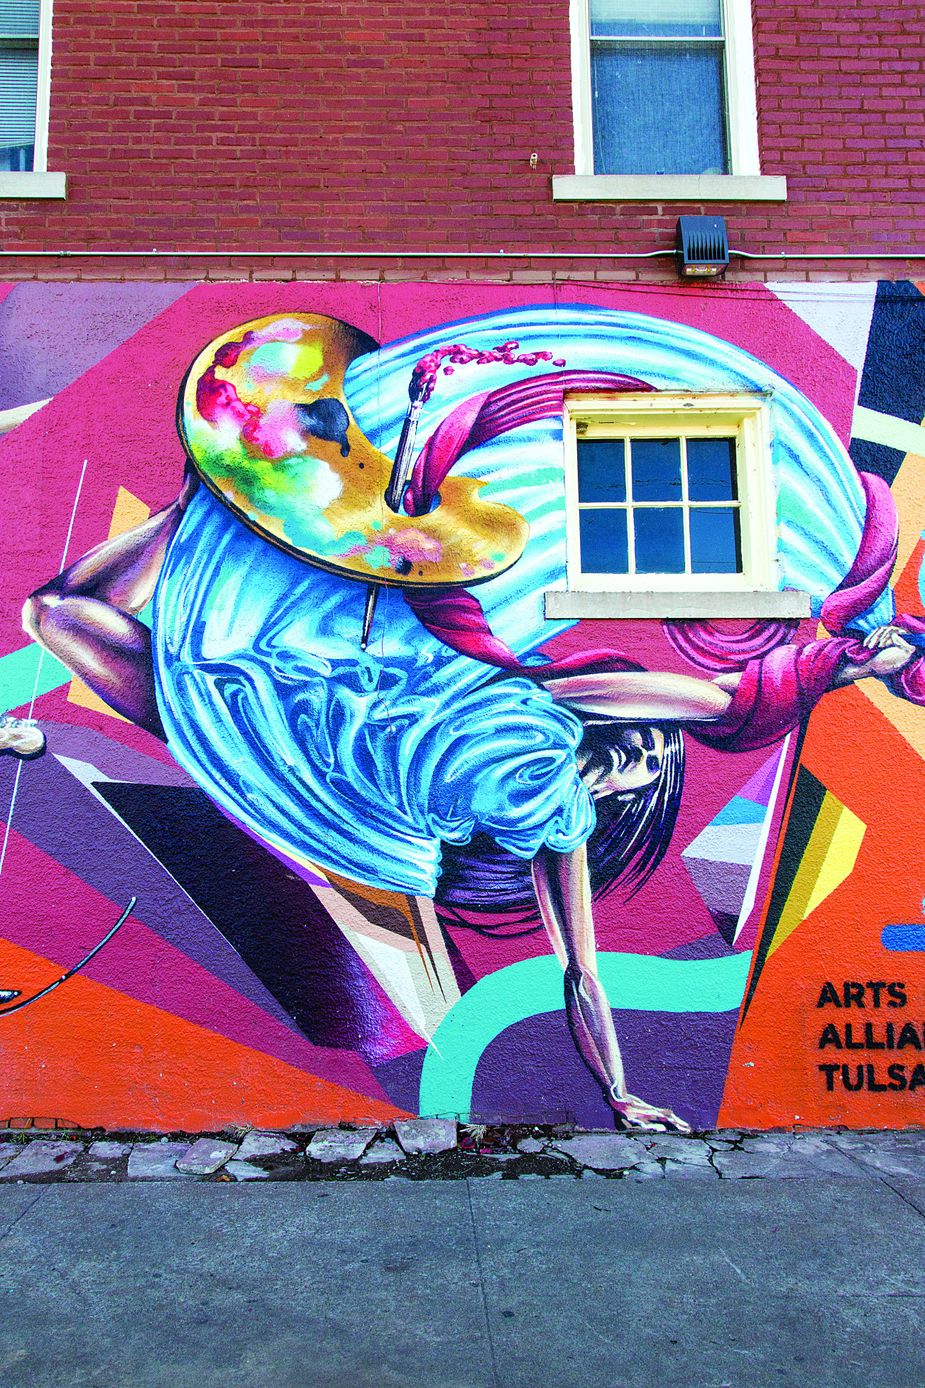 Yatika Starr Fields and Codak Smith collaborated on this mural outside of the Hunt Club in the Tulsa Arts District.